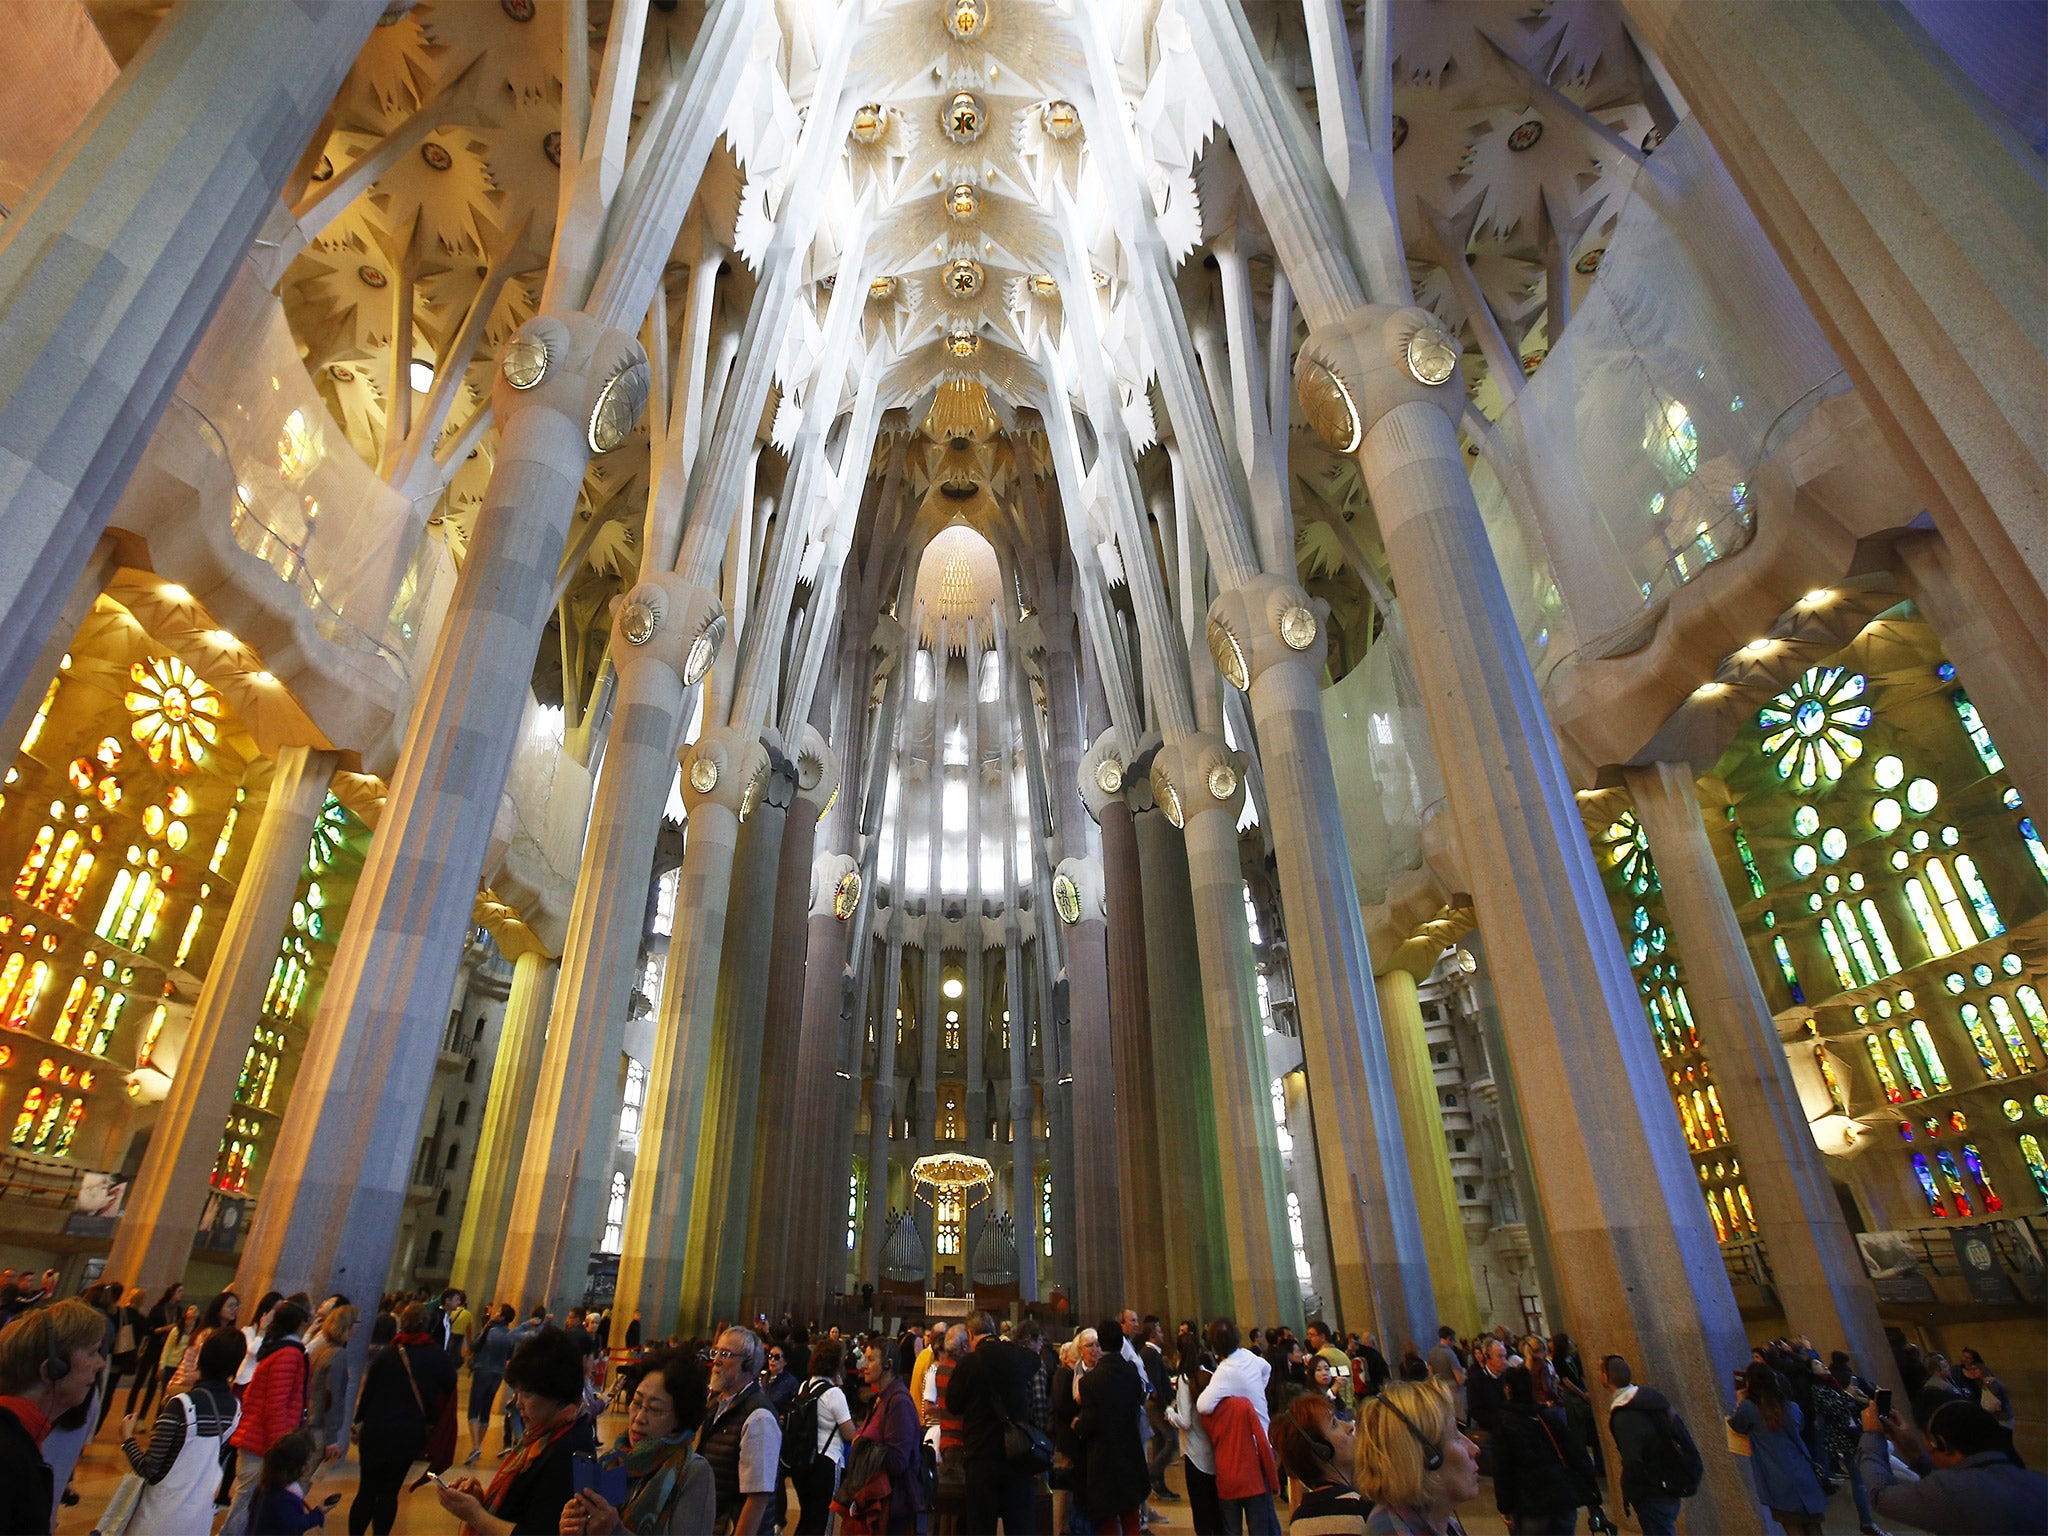 Antoni Gaudi’s Sagrada Familia Basilica in Barcelona has entered the final phase of building its six towers. Officials say when it is finished in 2026 it will be Europe’s tallest religious building at 172.5m